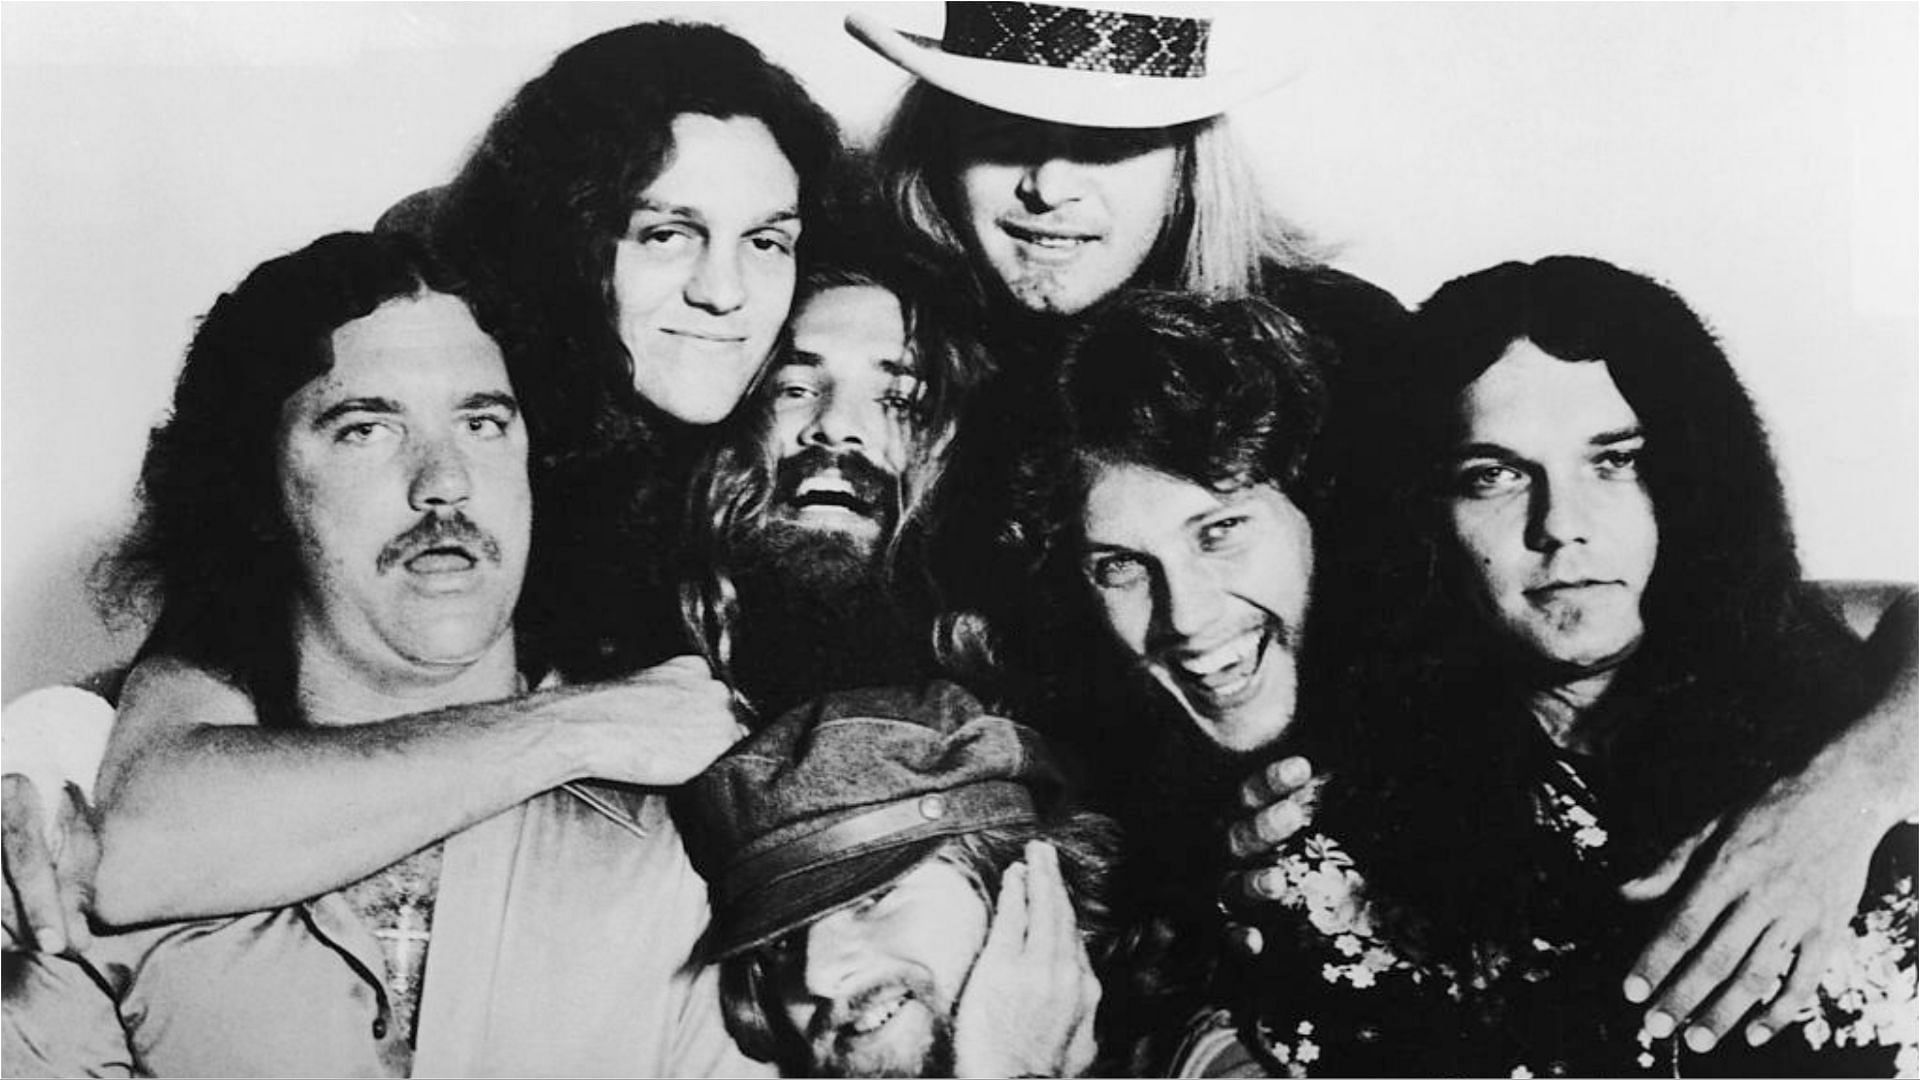 All the members of Lynyrd Skynyrd (Image via Hulton Archive/Getty Images)